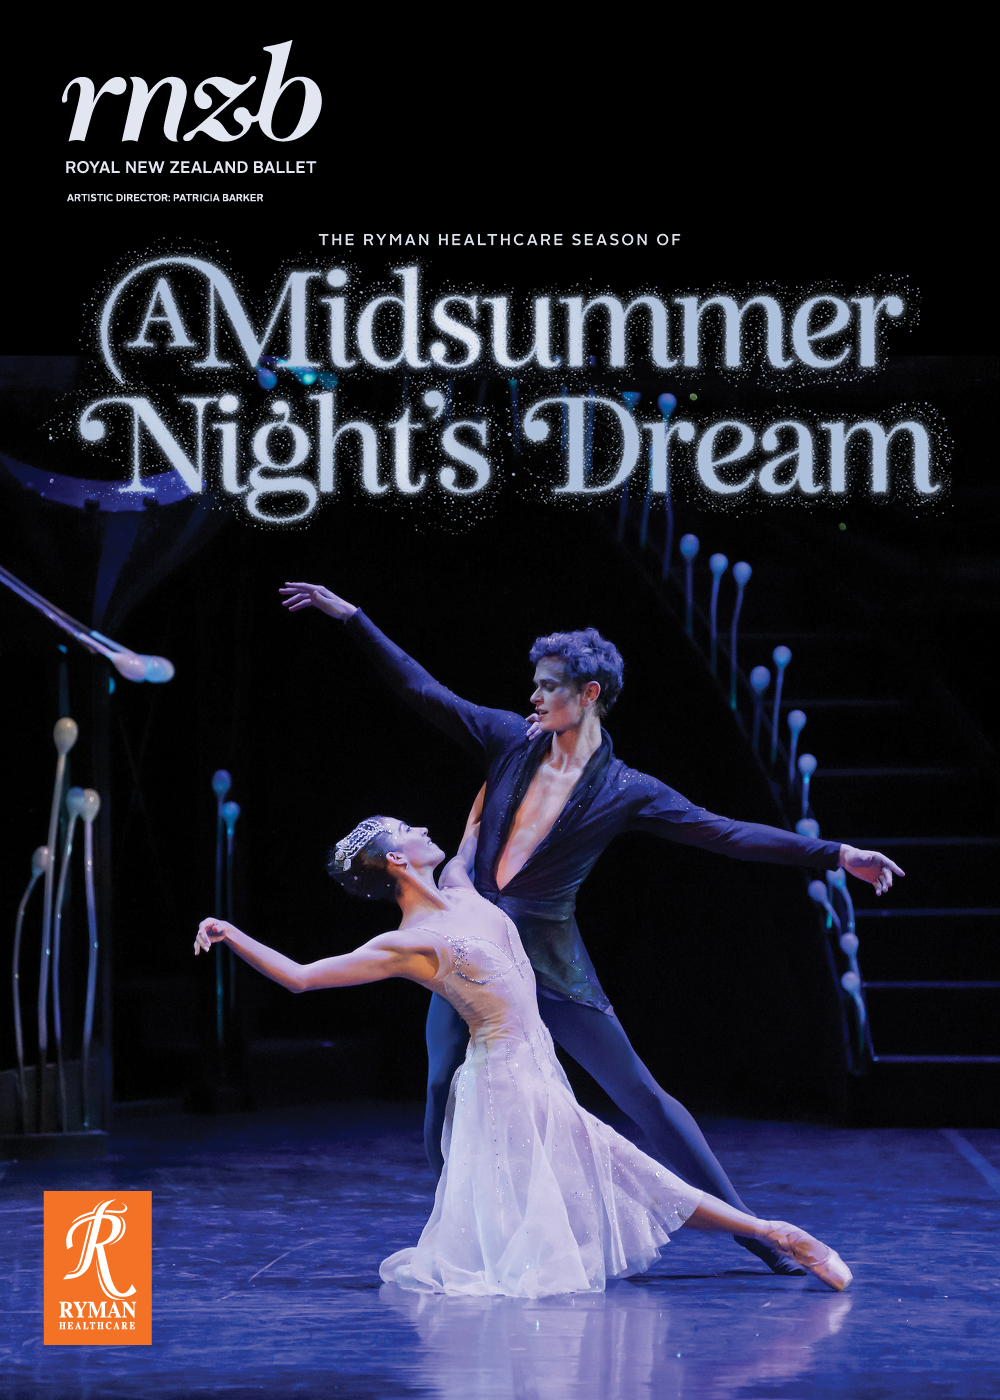 A Midsummer Night's Dream – Live in Your Living Room